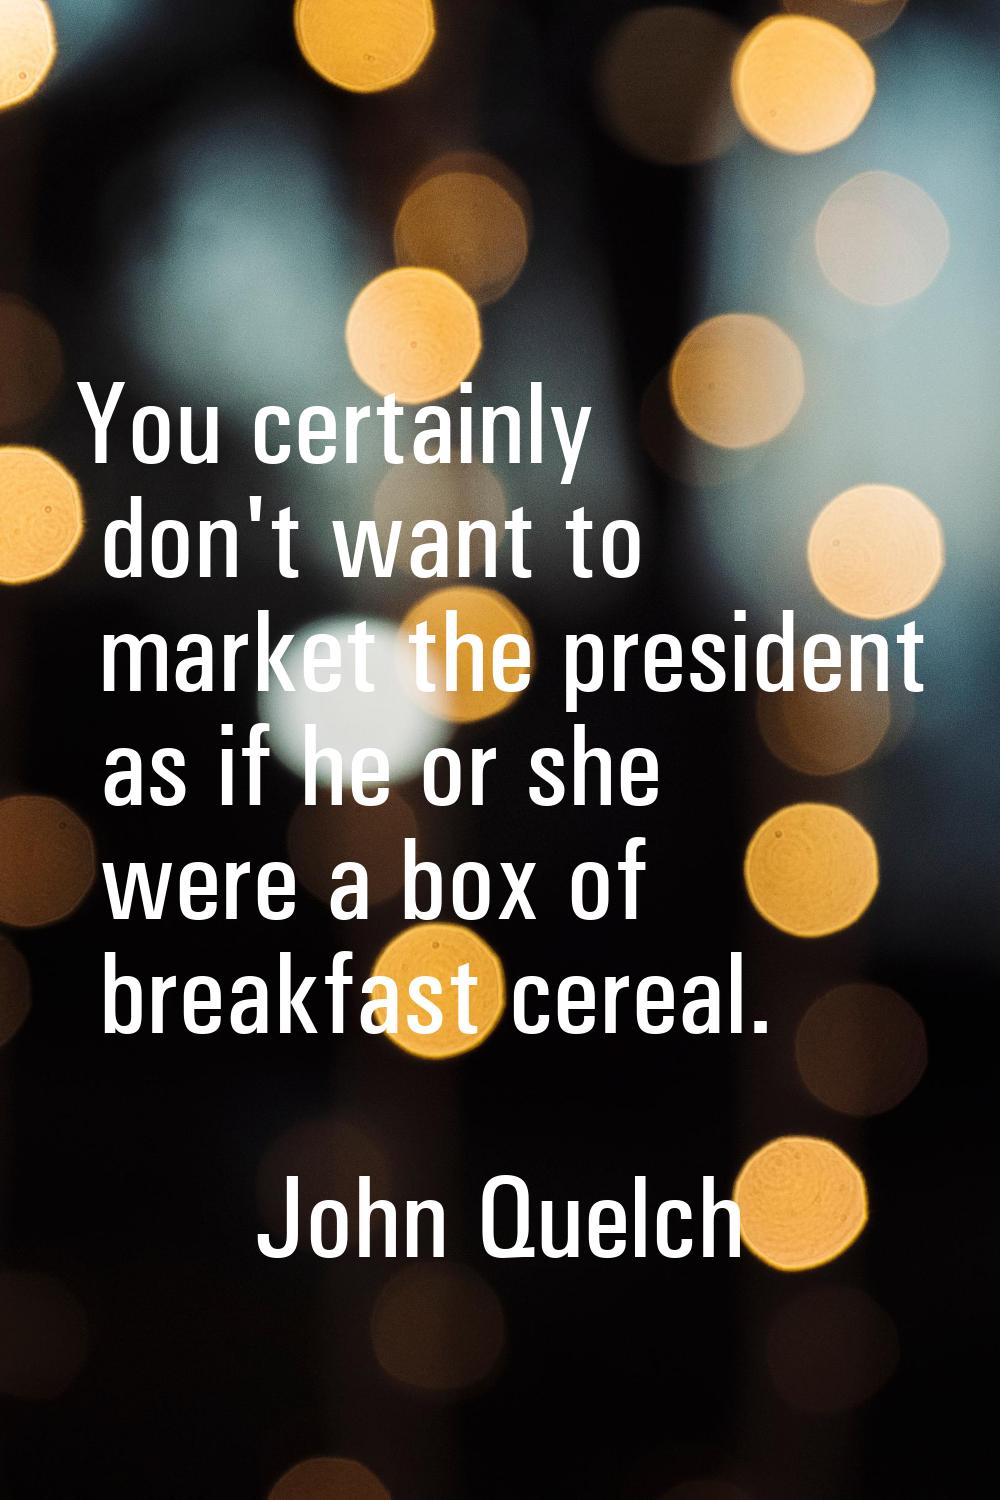 You certainly don't want to market the president as if he or she were a box of breakfast cereal.